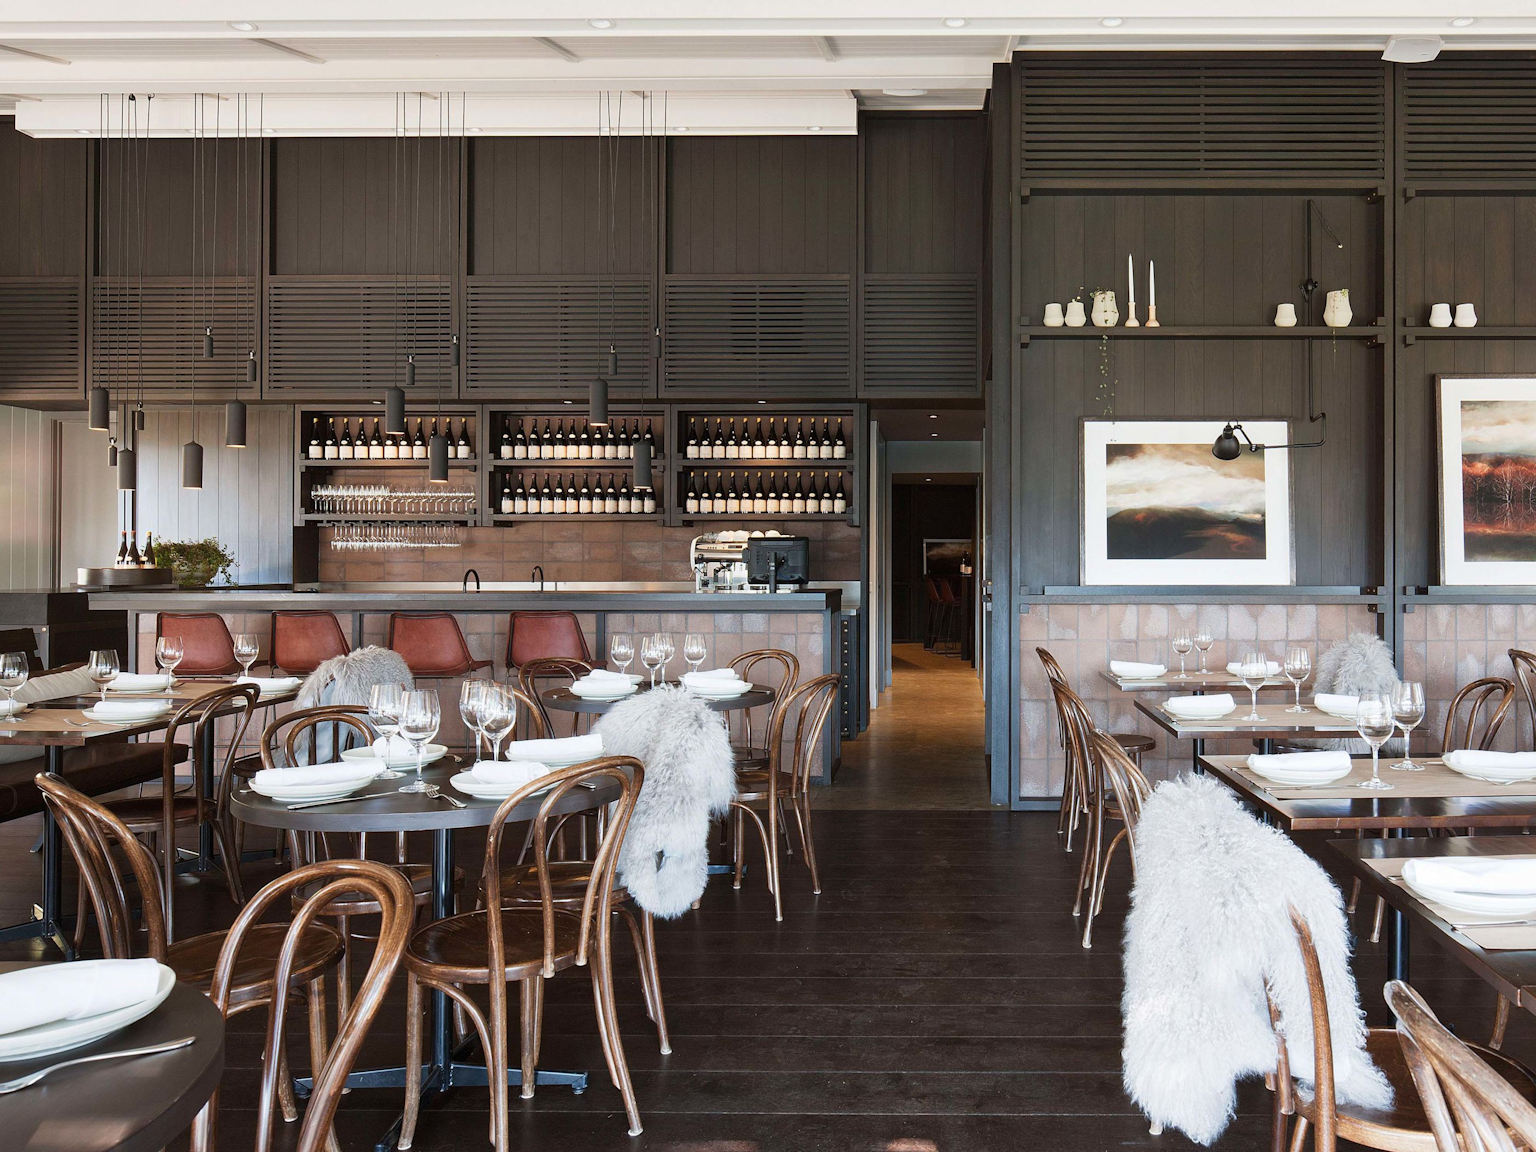 Natural tones and textures create a beautiful, tranquil space in the Polperro Winery restaurant